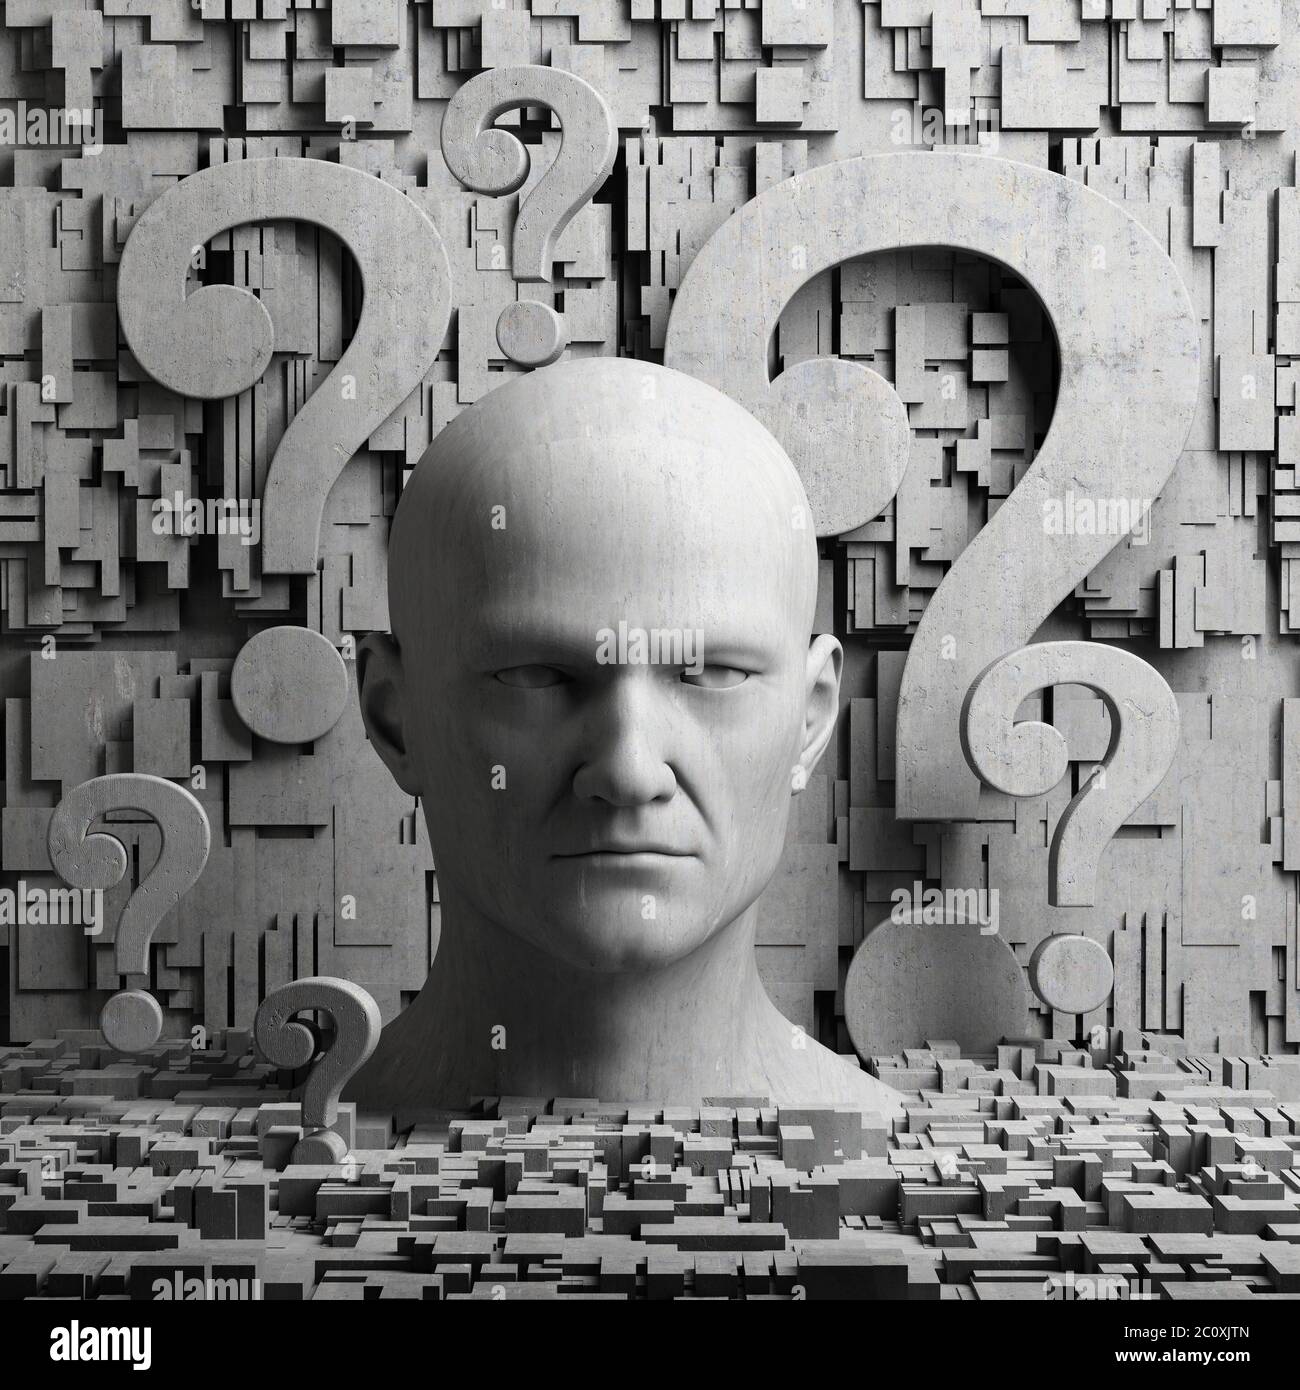 Thinking man statue and question marks Stock Photo